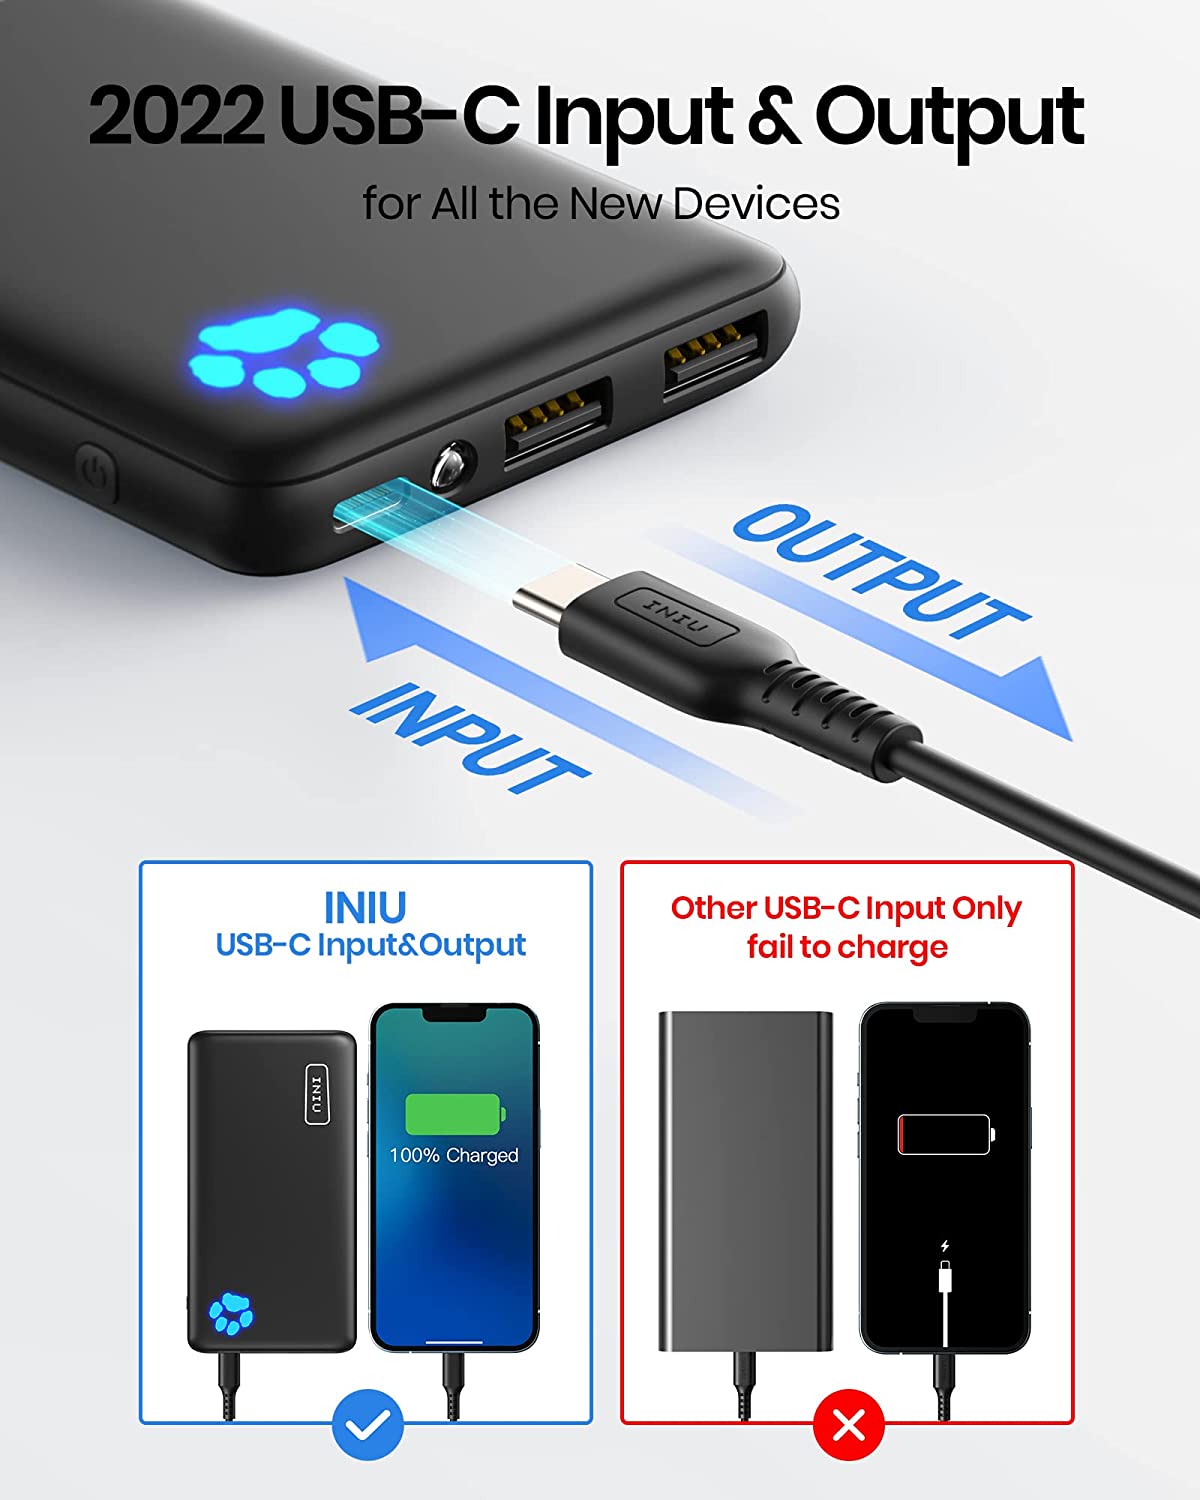 INIU Portable Power Bank, Slimmest 10000mAh Portable Charger with LED  Display & Phone Holder, White 